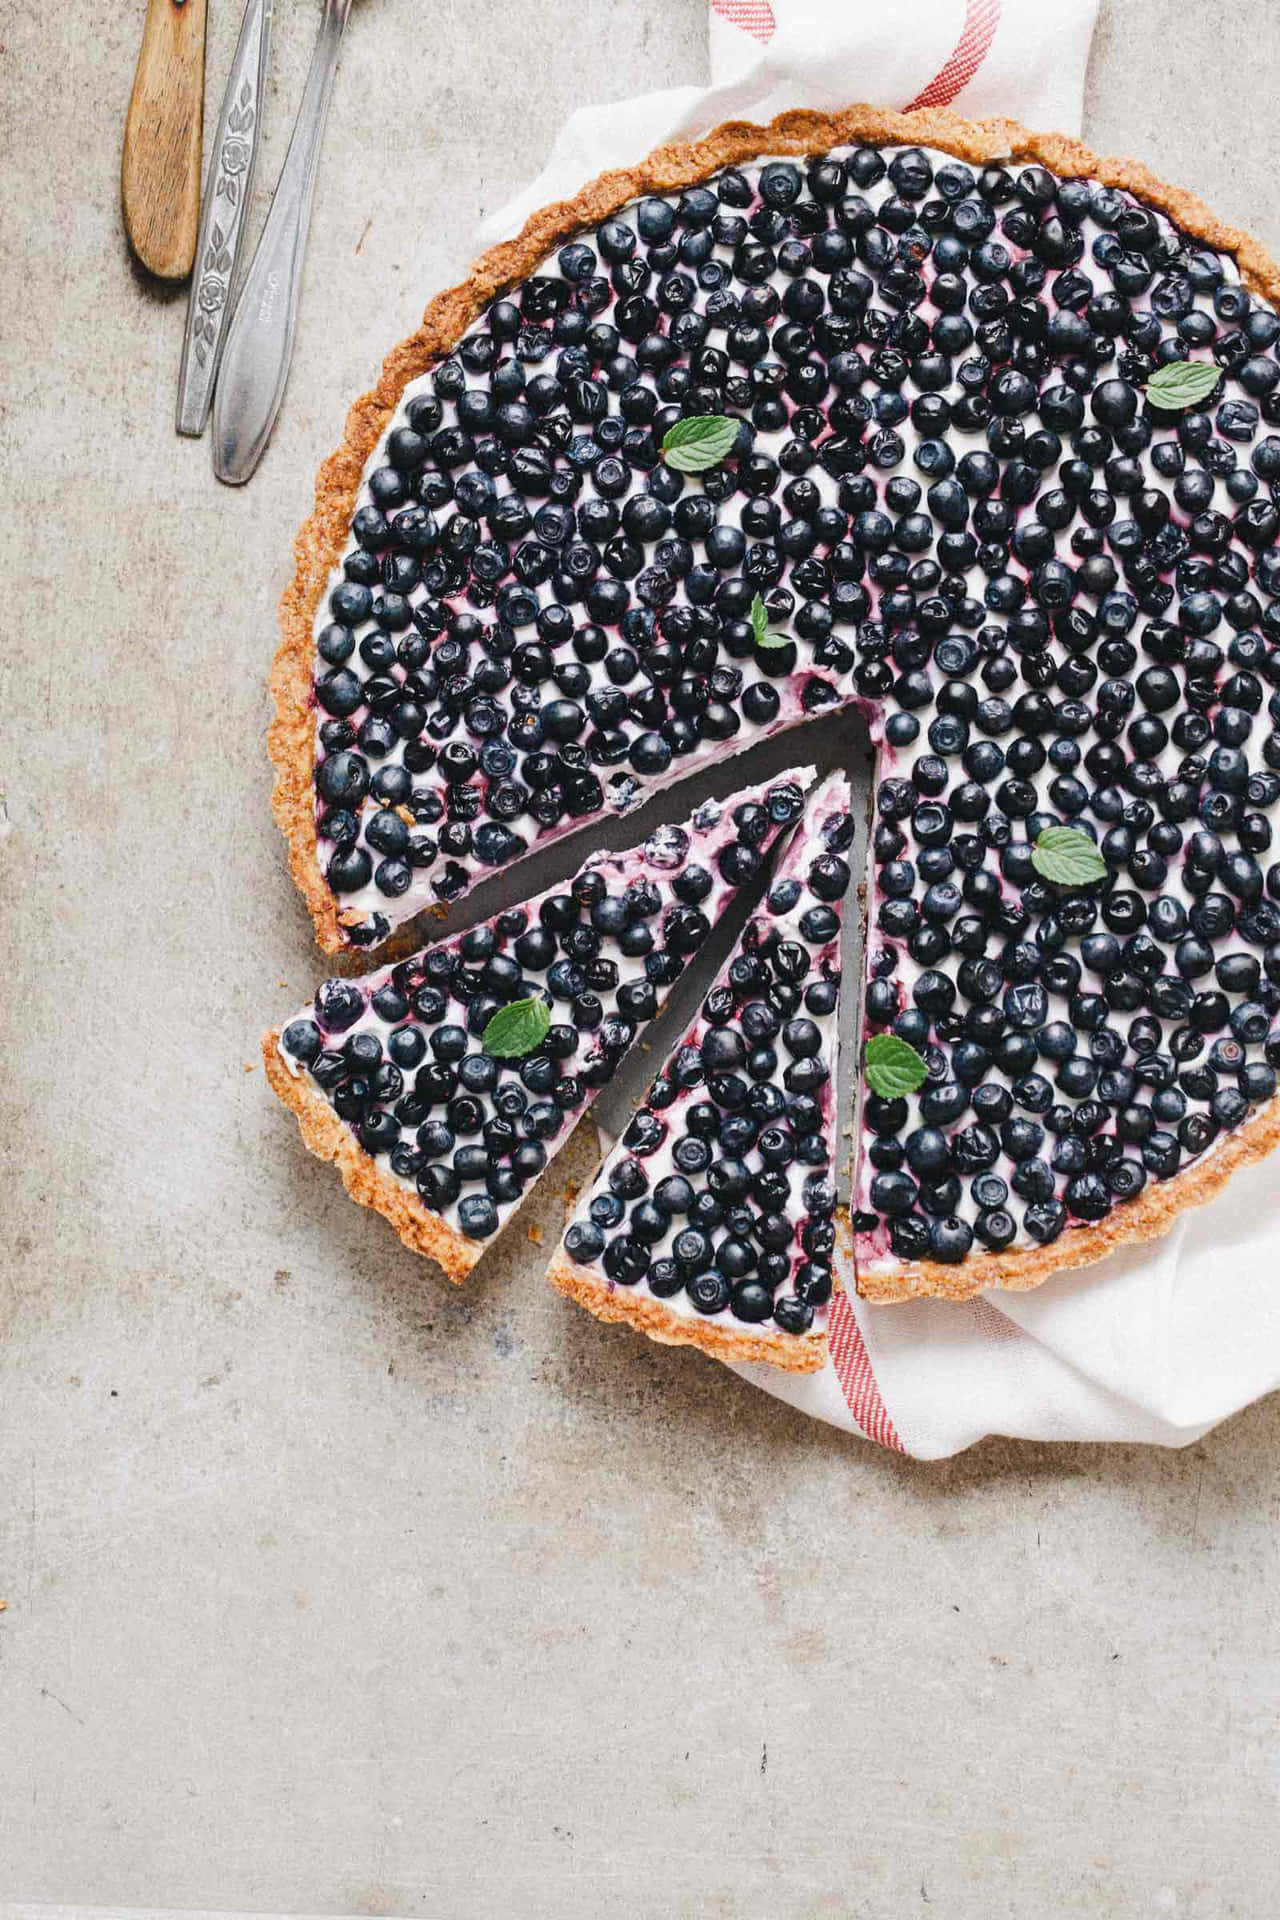 Indulge in this delicious delight of blueberry-filled tart! Wallpaper